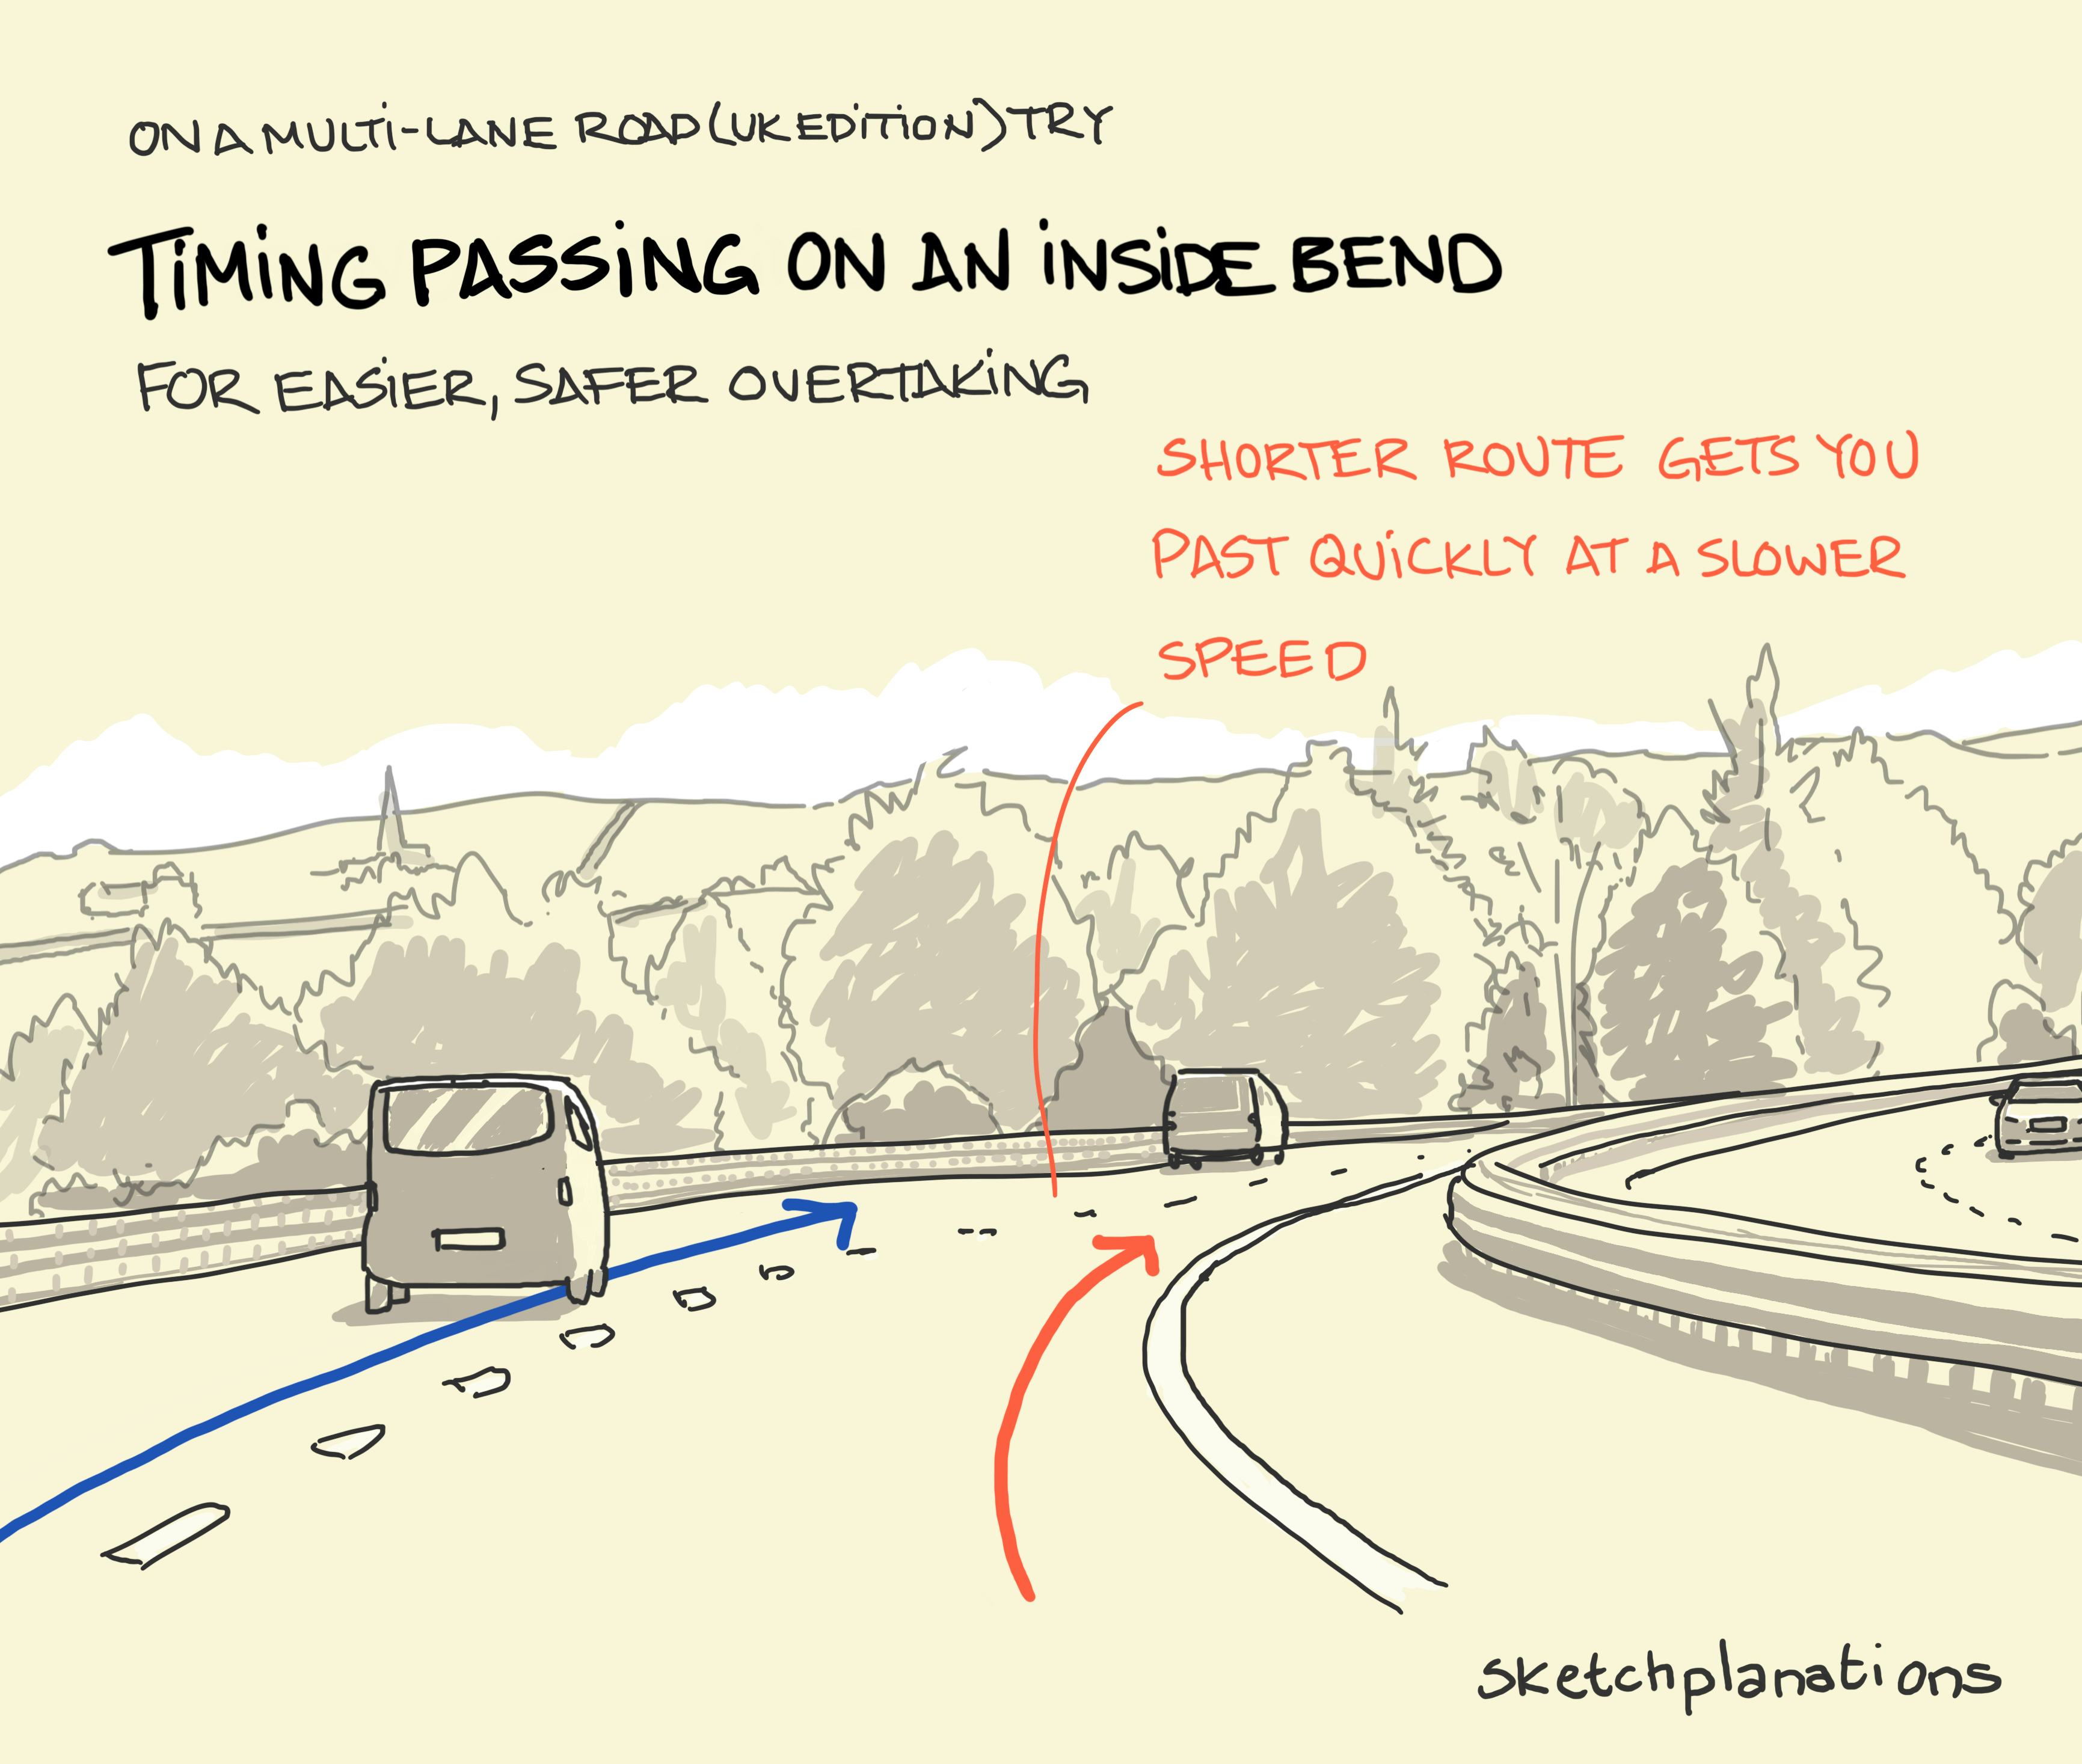 Time passing on an inside bend illustration (UK edition): showing a two-lane carriage way bending to the right with a red arrow to show the shorter route for overtaking